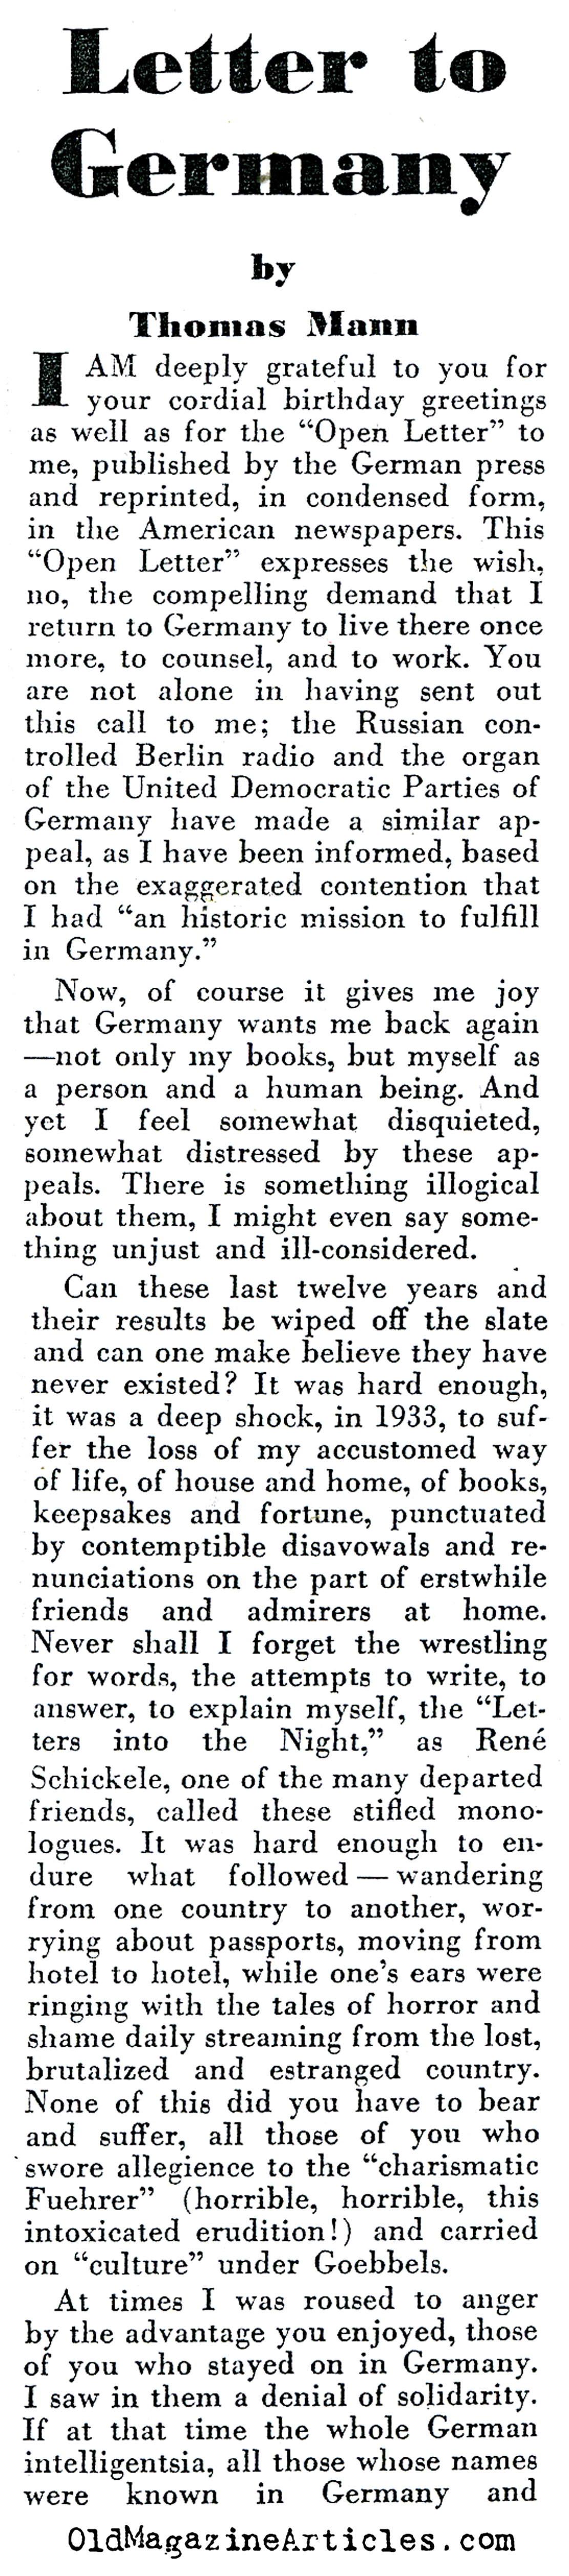 ''A Letter to Germany'' by Thomas Mann (Prevent W.W. III Magazine, 1945)